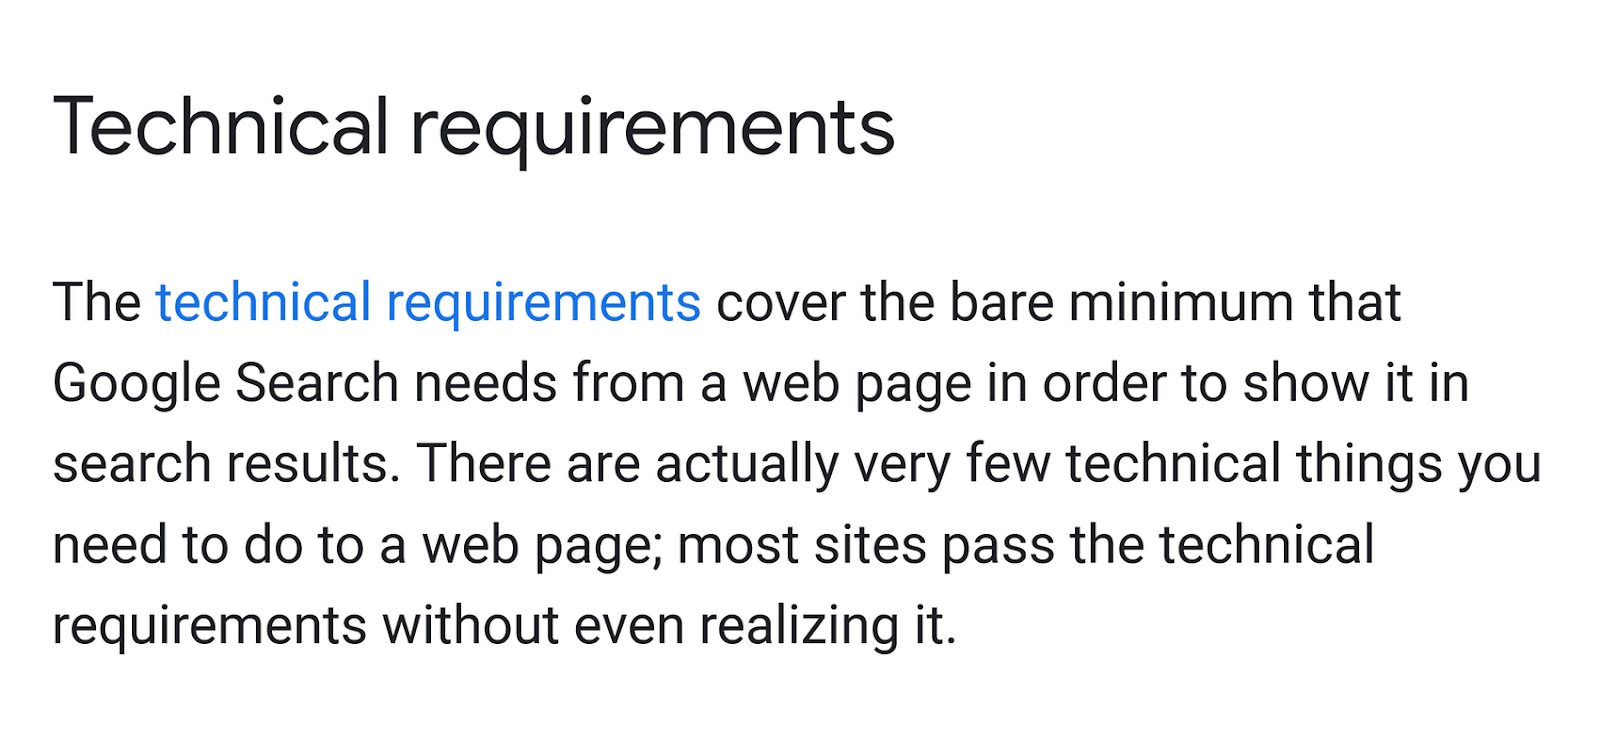 Google Search Essentials requirements